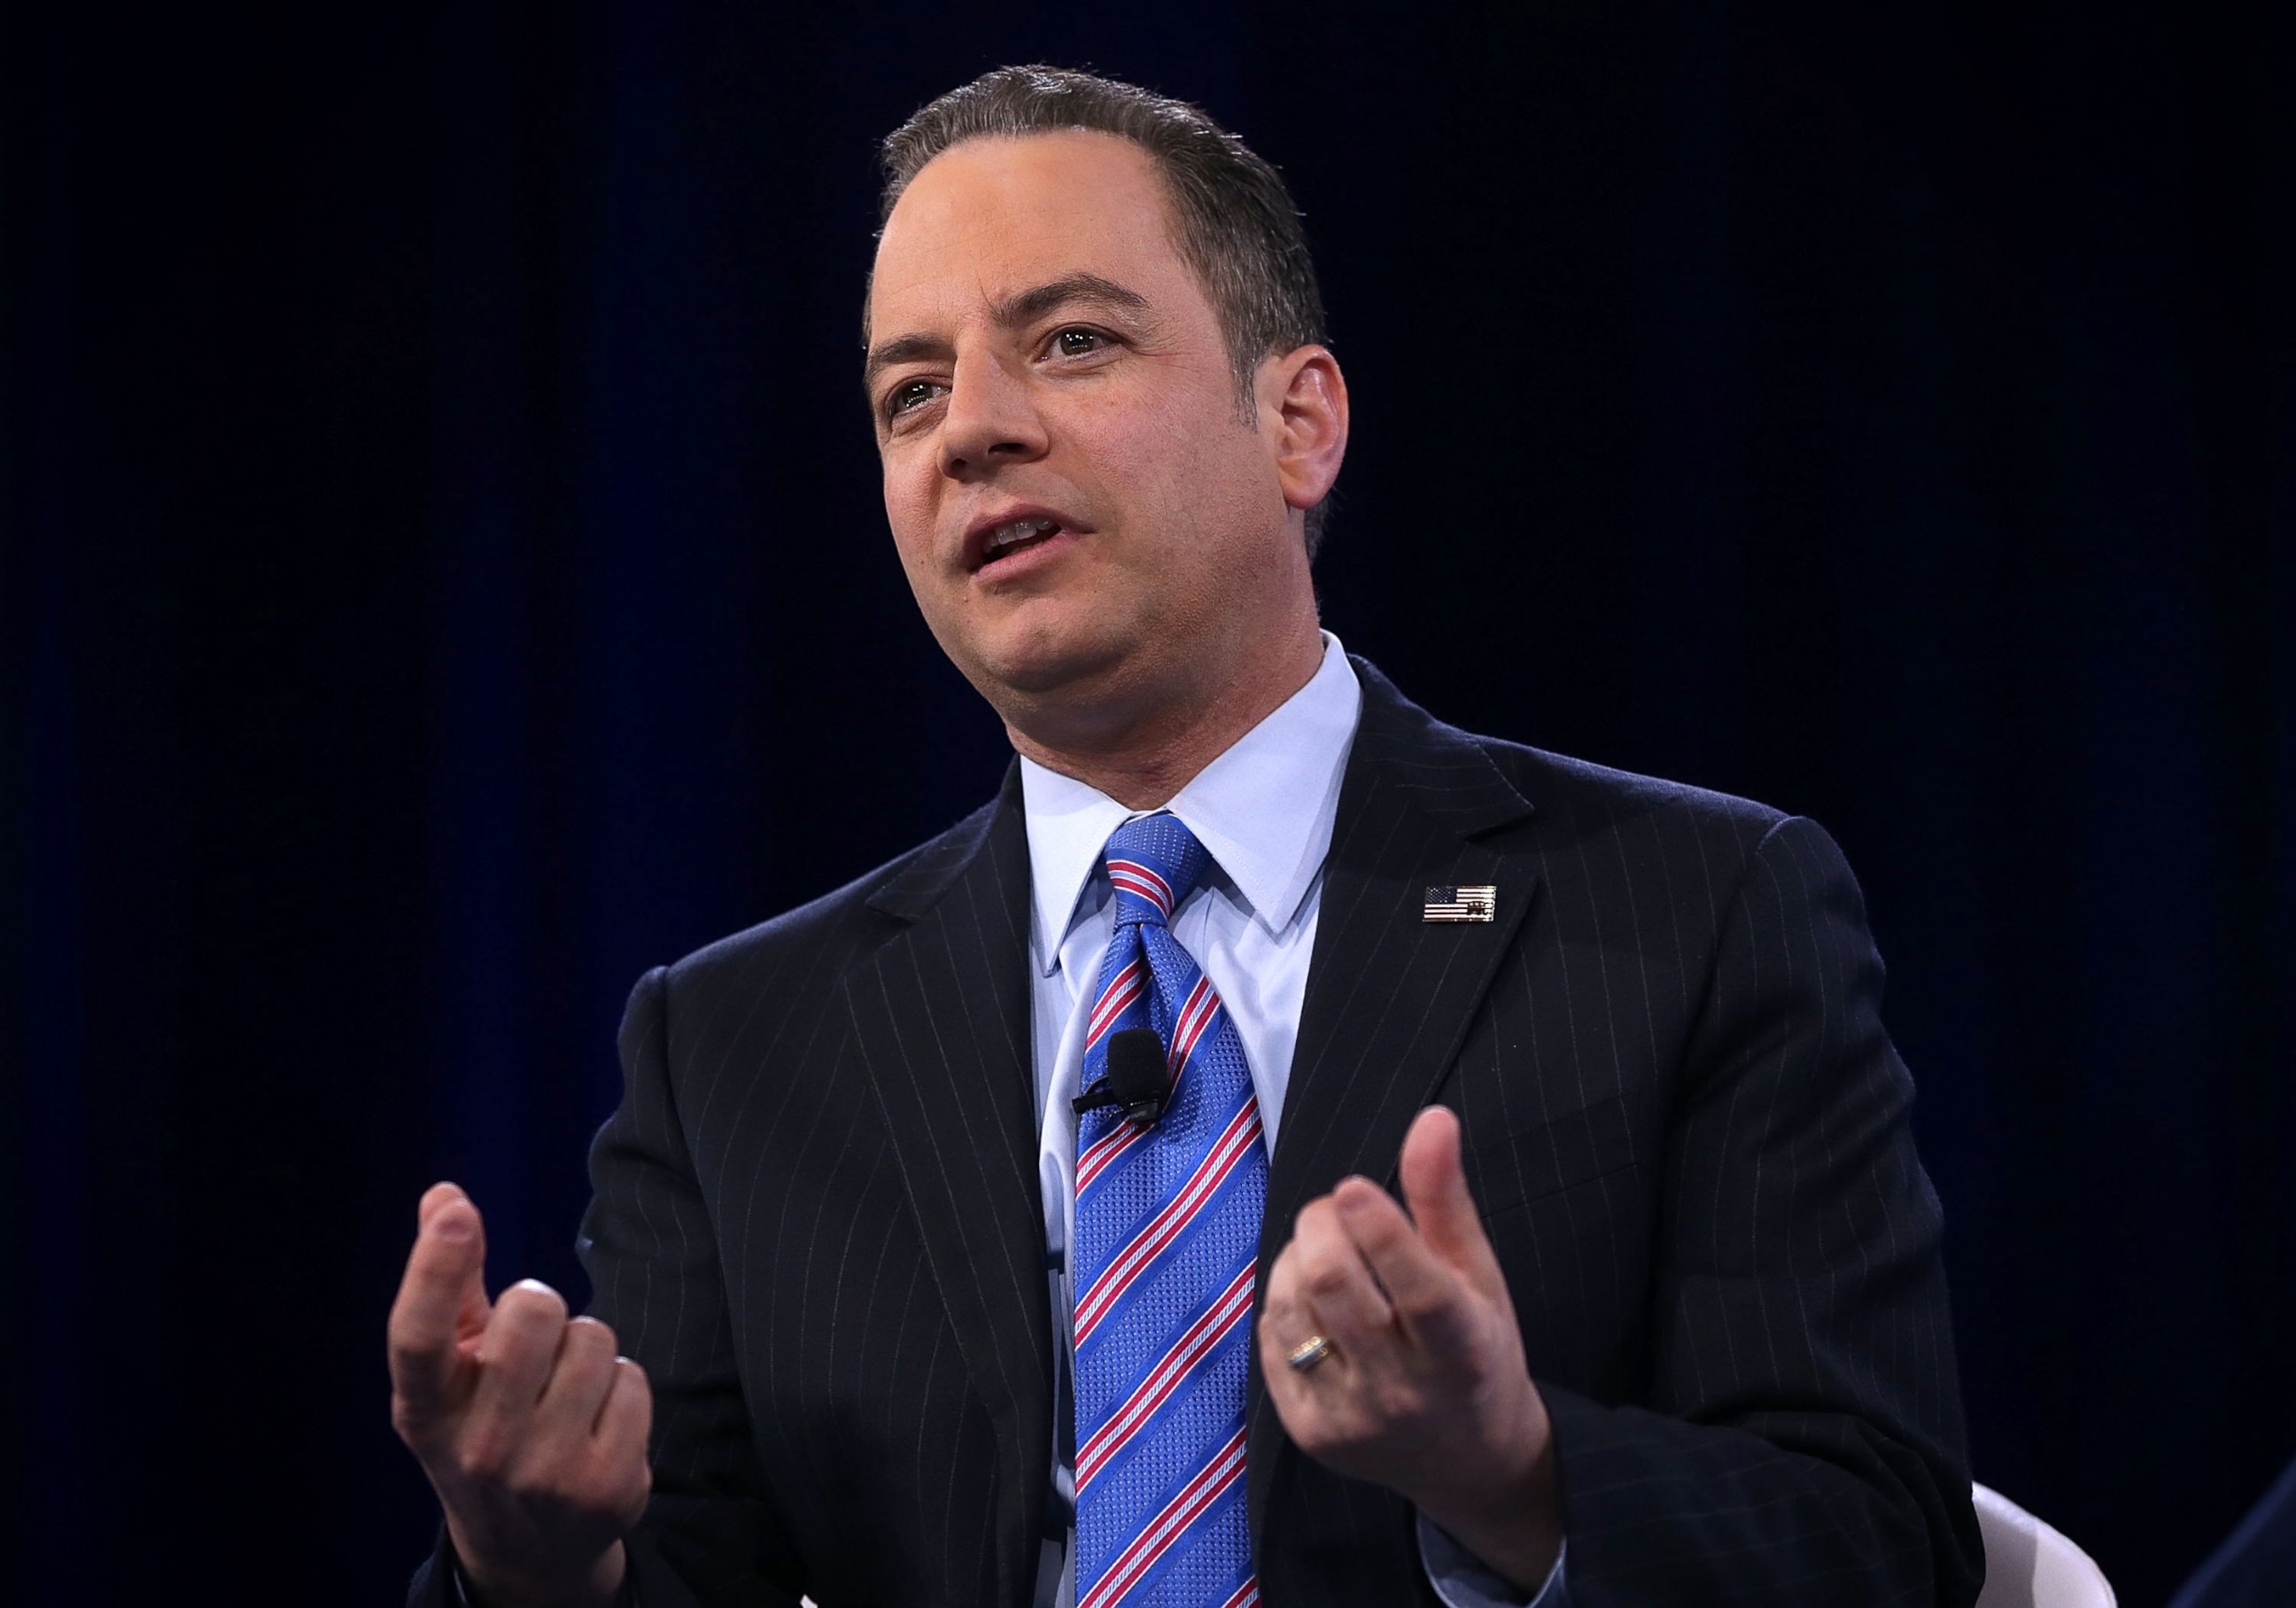 PHOTO: Chairman of the Republican National Committee Reince Priebus participates in a discussion during CPAC 2016, March 4, 2016 in National Harbor, Md. 